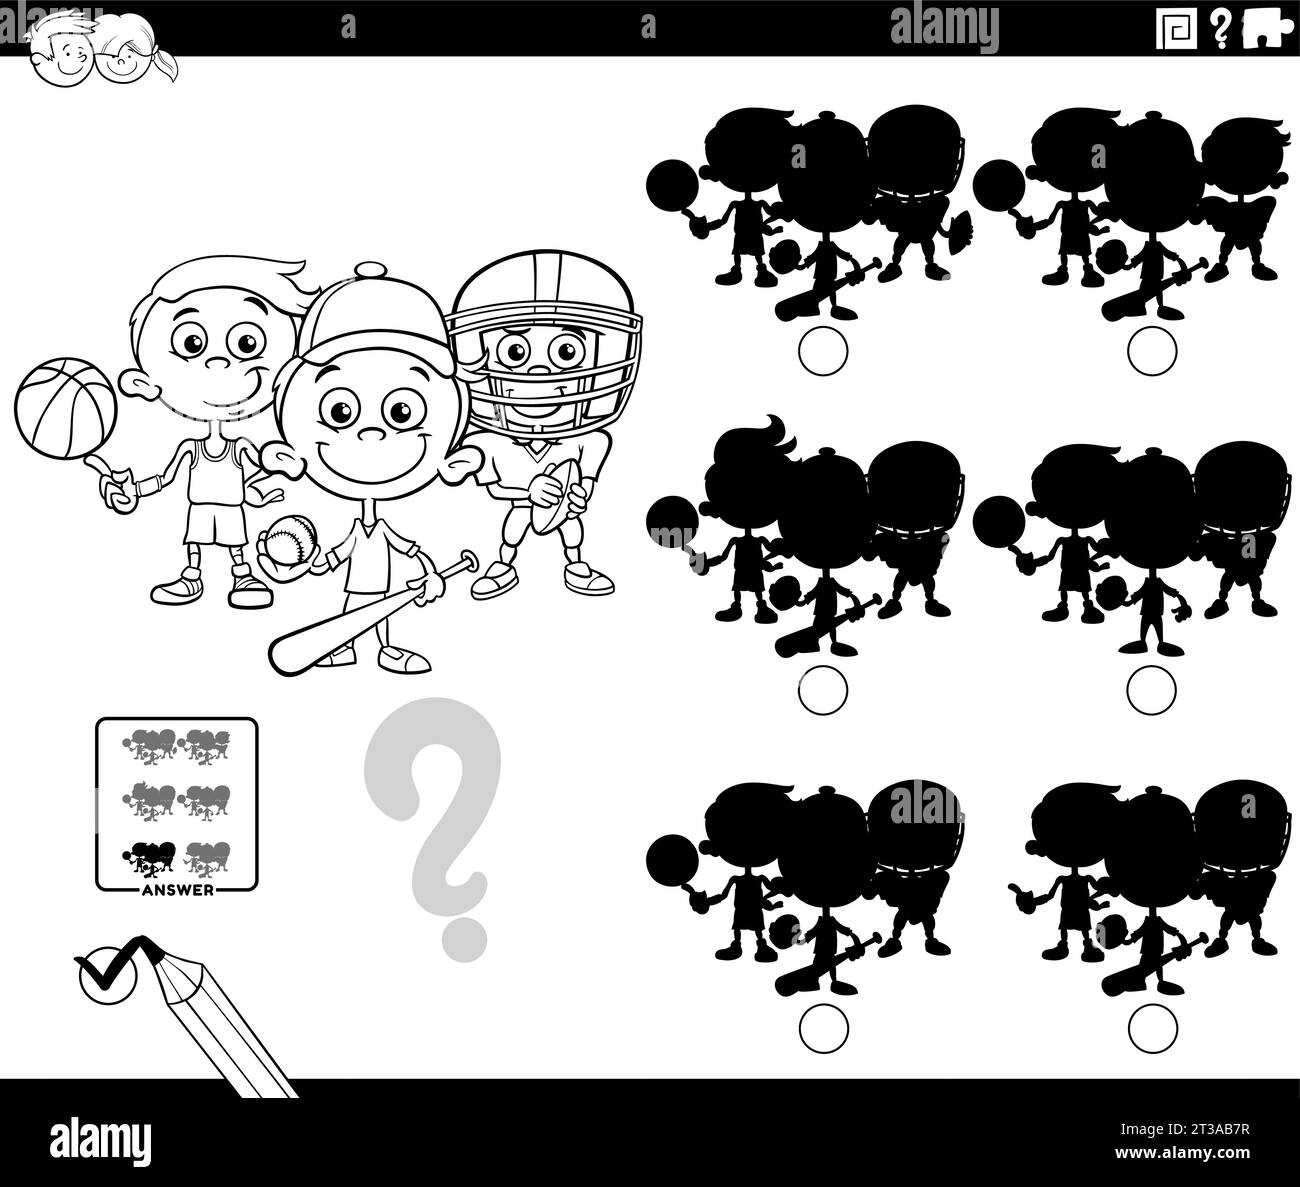 Black and white cartoon illustration of finding the right picture to the shadow educational game with boys practicing various sports coloring page Stock Vector